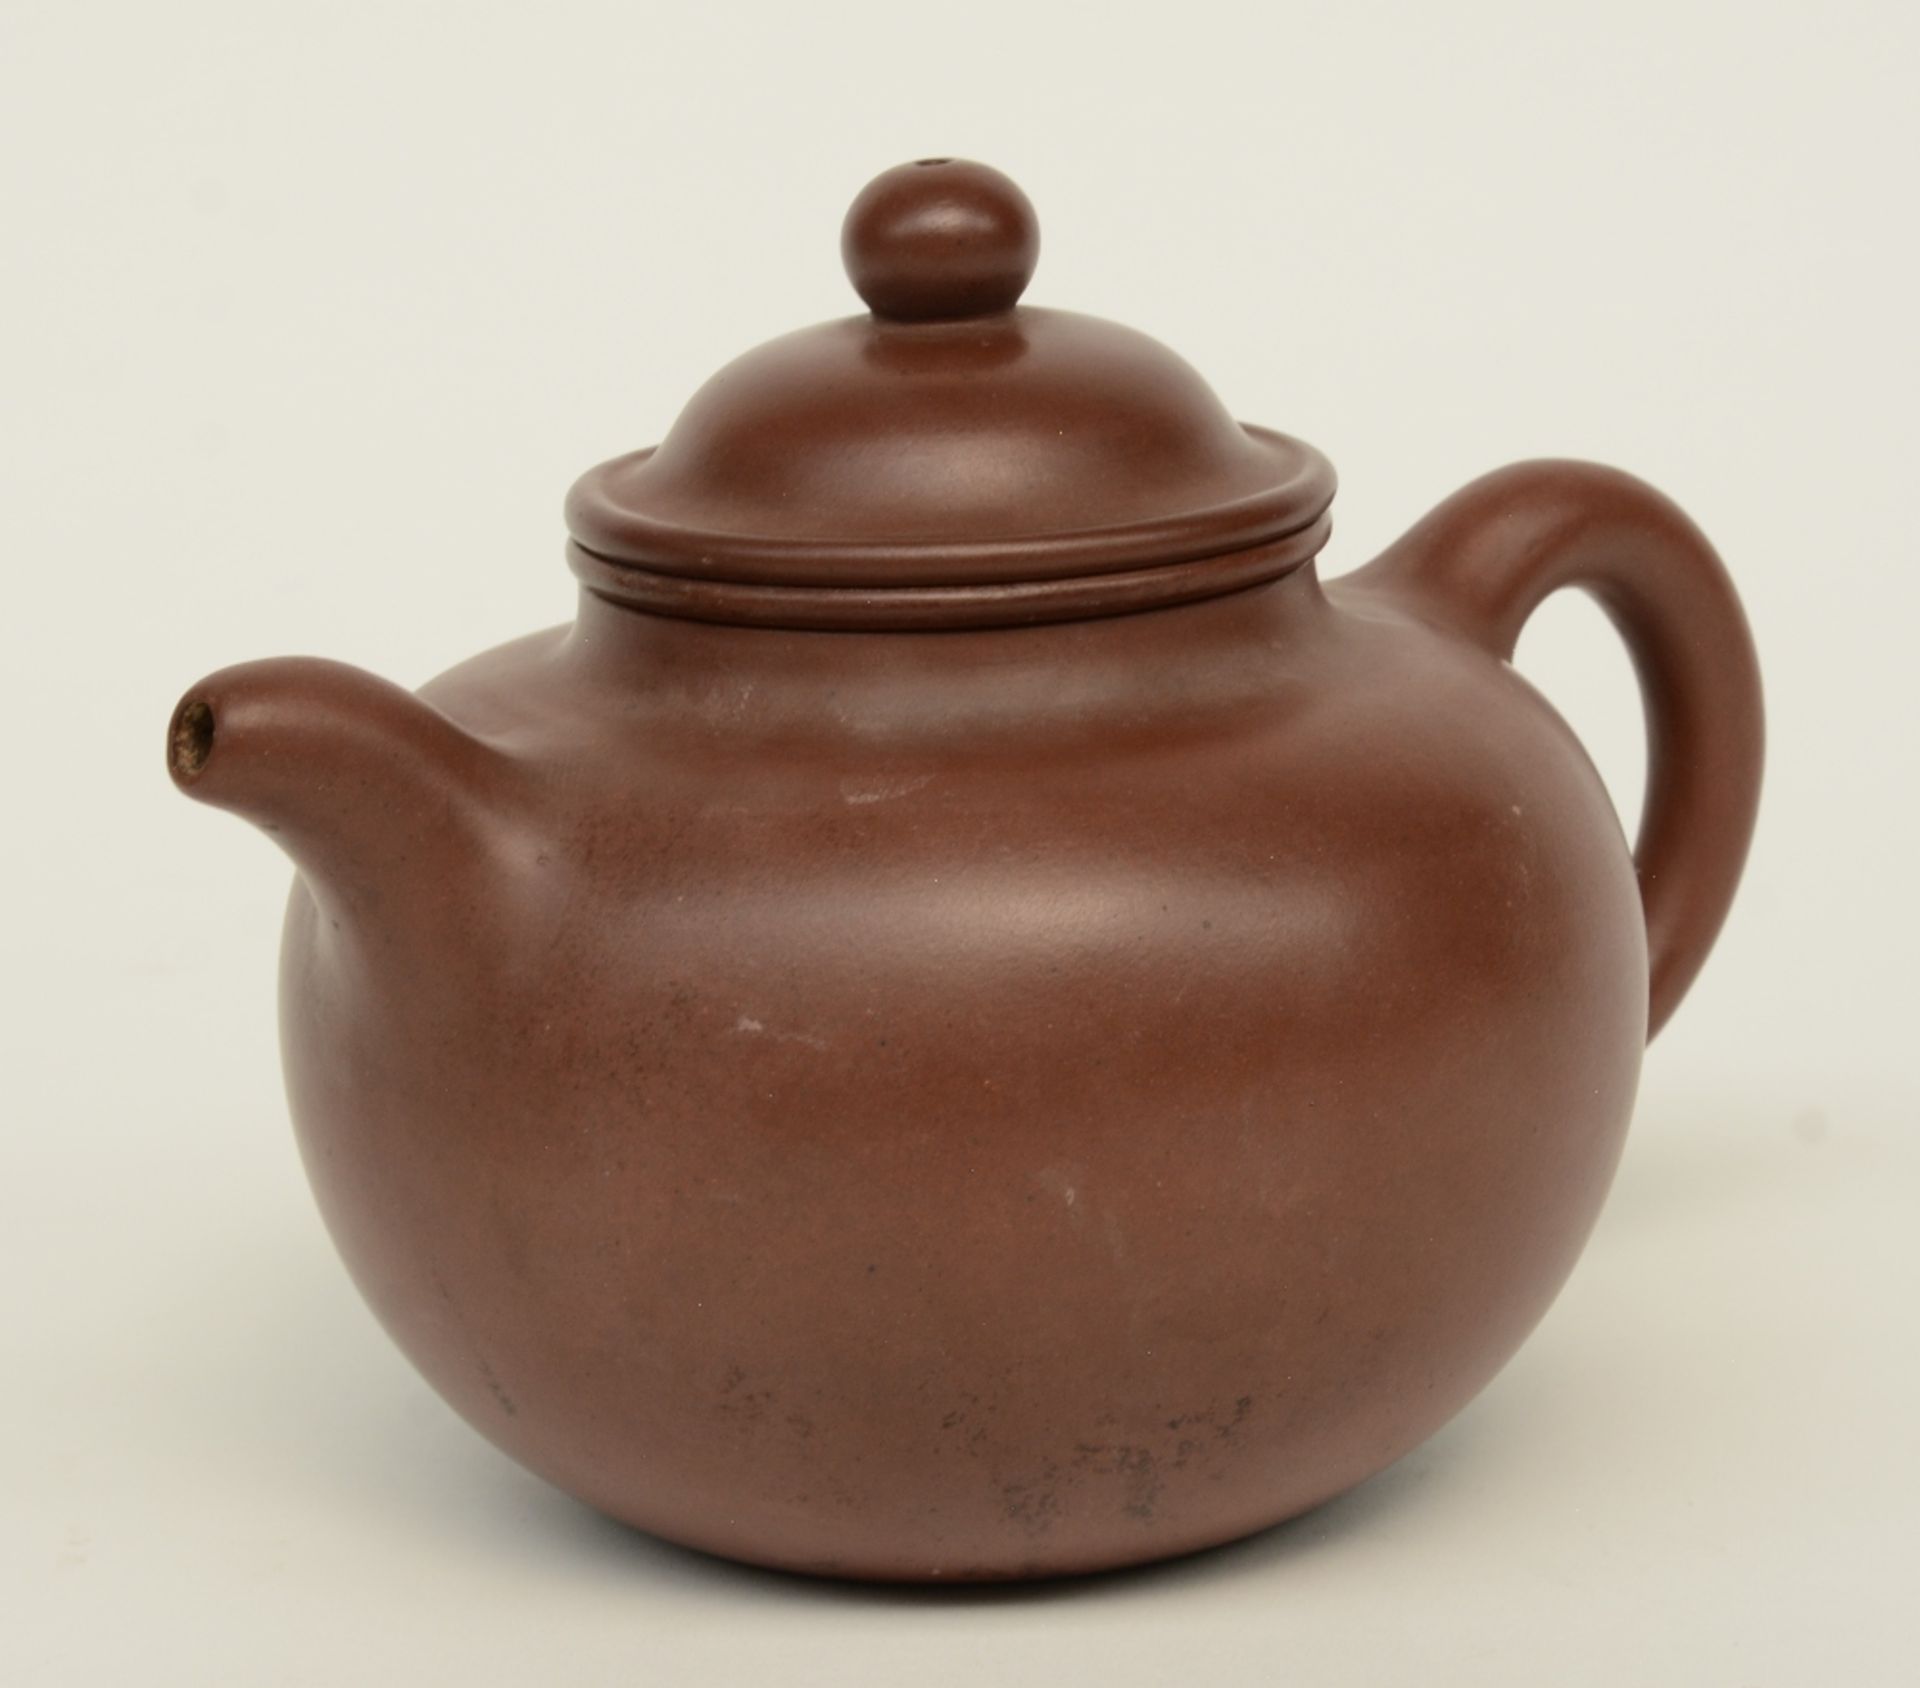 A Chinese 'Yixing' teapot, marked Da Heng, probably 18thC, H 12,5 cm